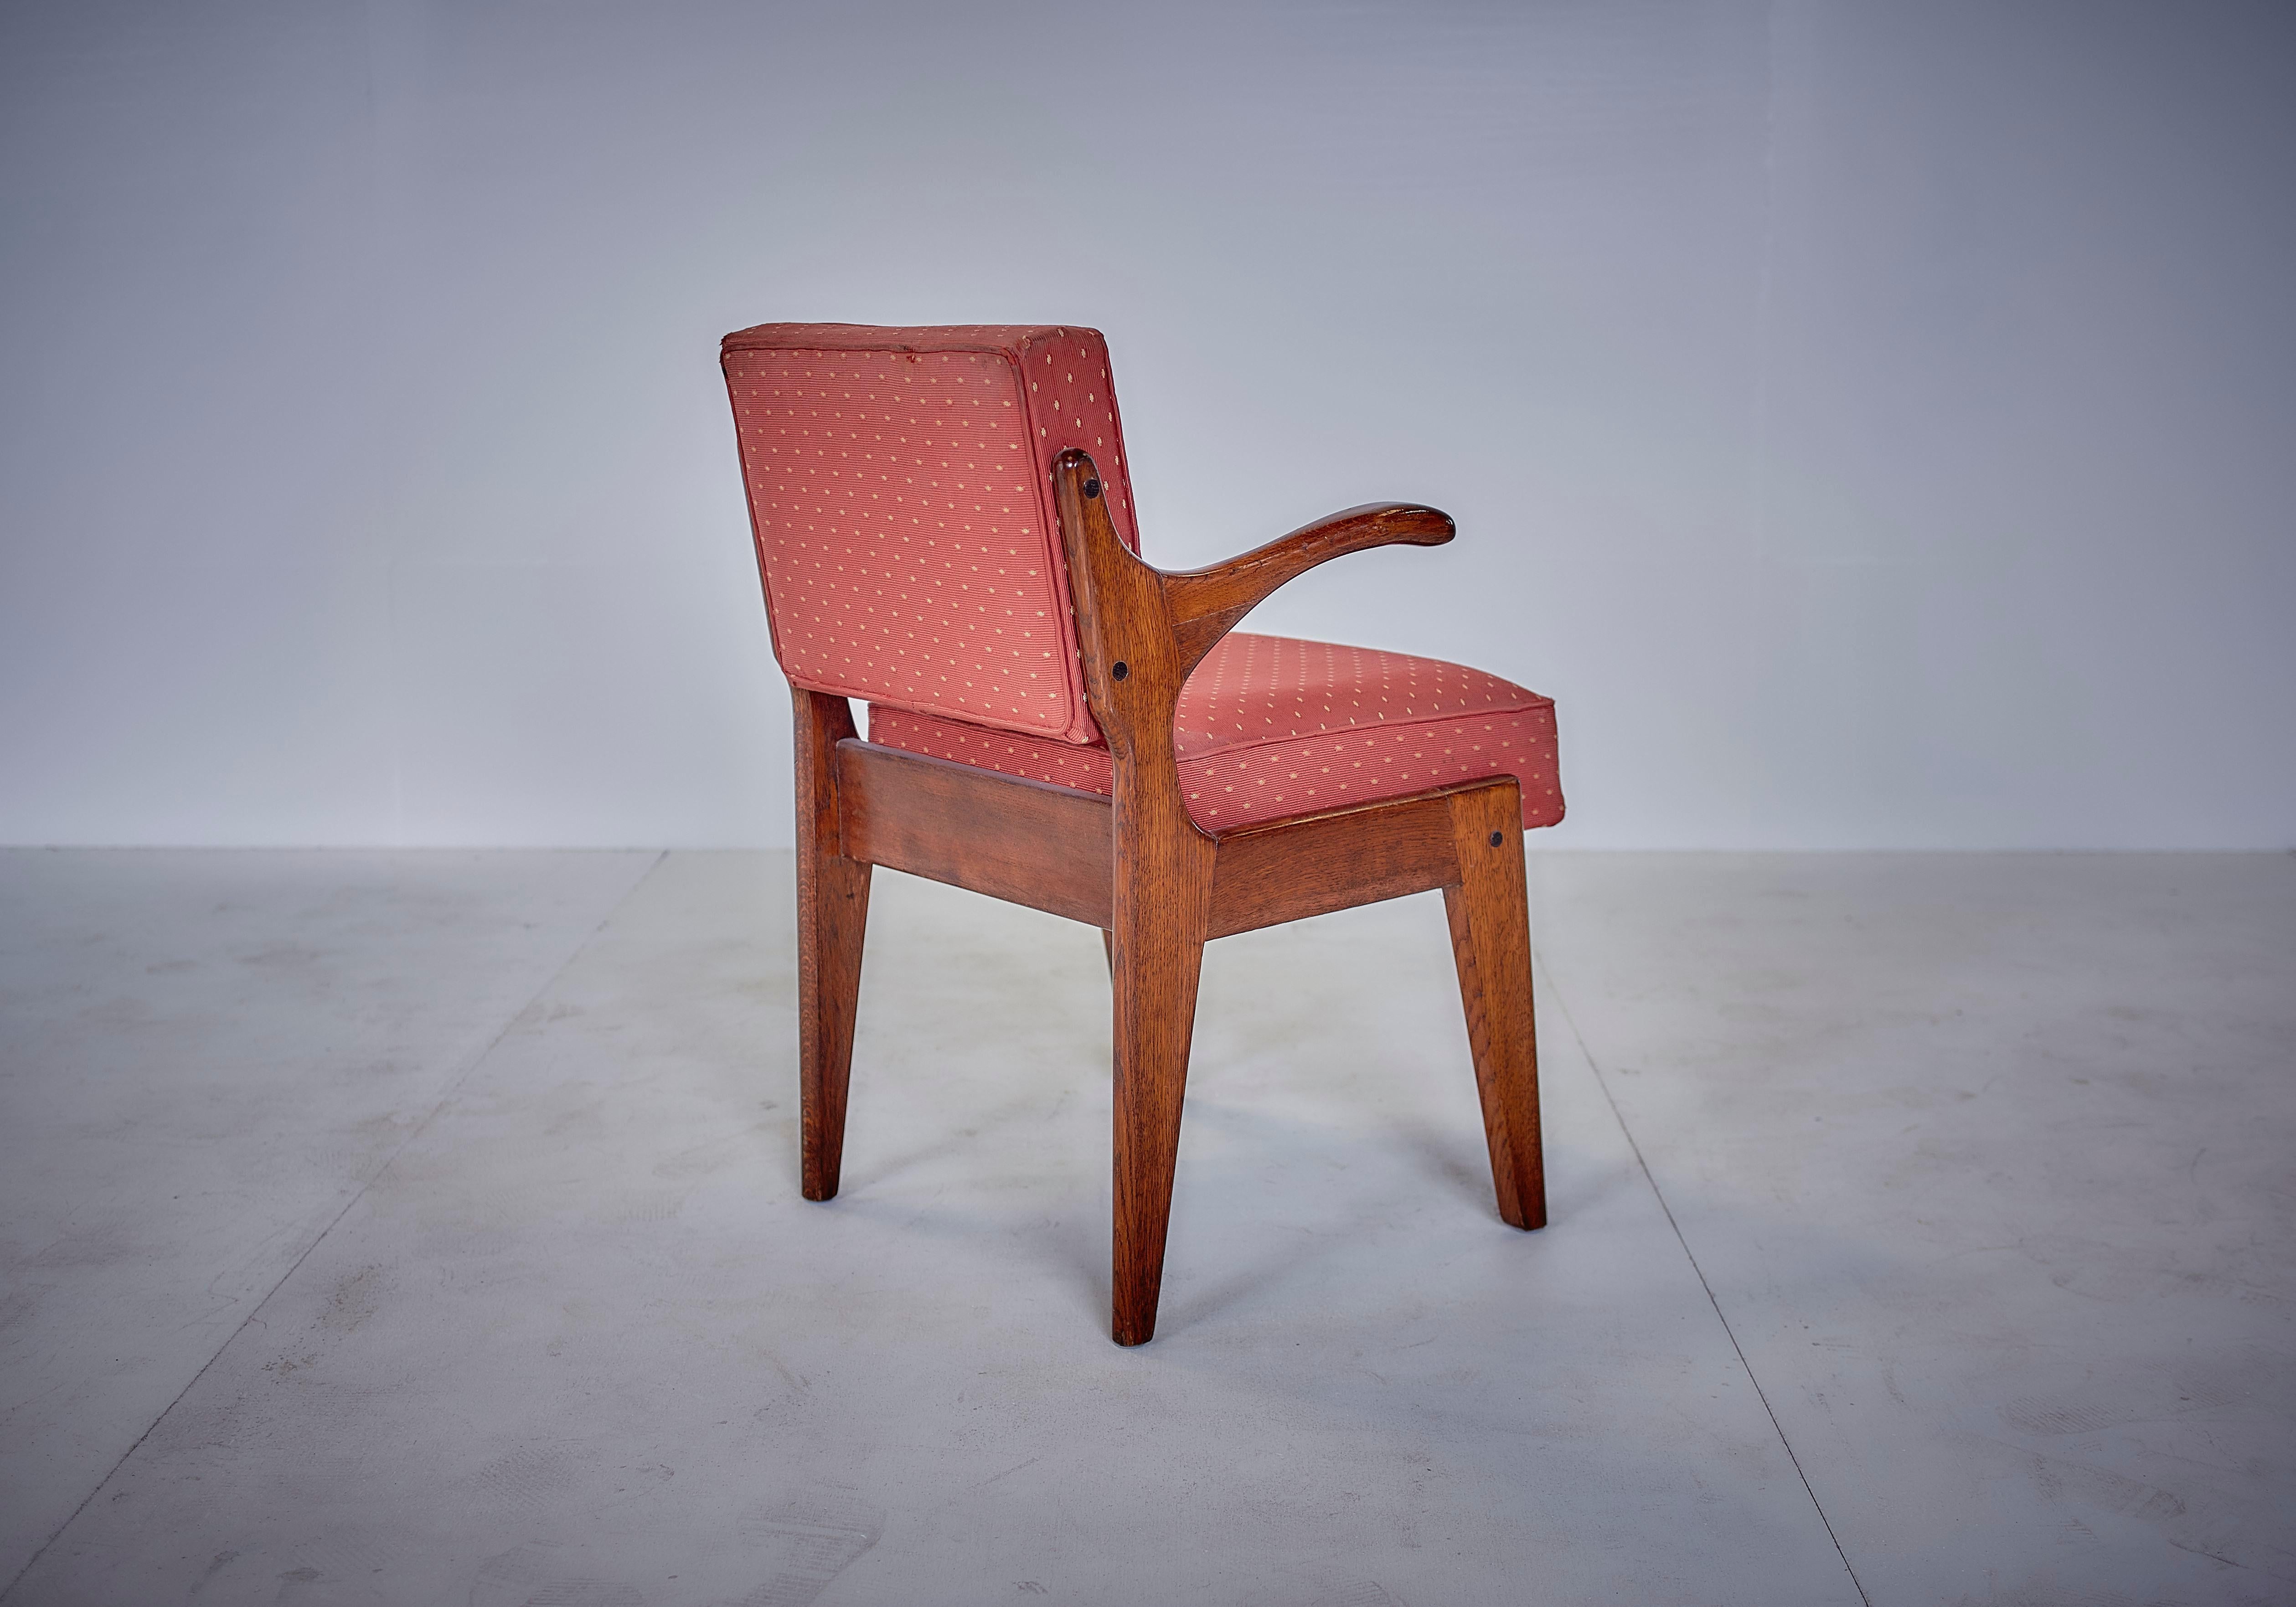 Guillerme & Chambron Midcentury Red Varnished Oak and Fabric French Chairs, 1960 For Sale 2